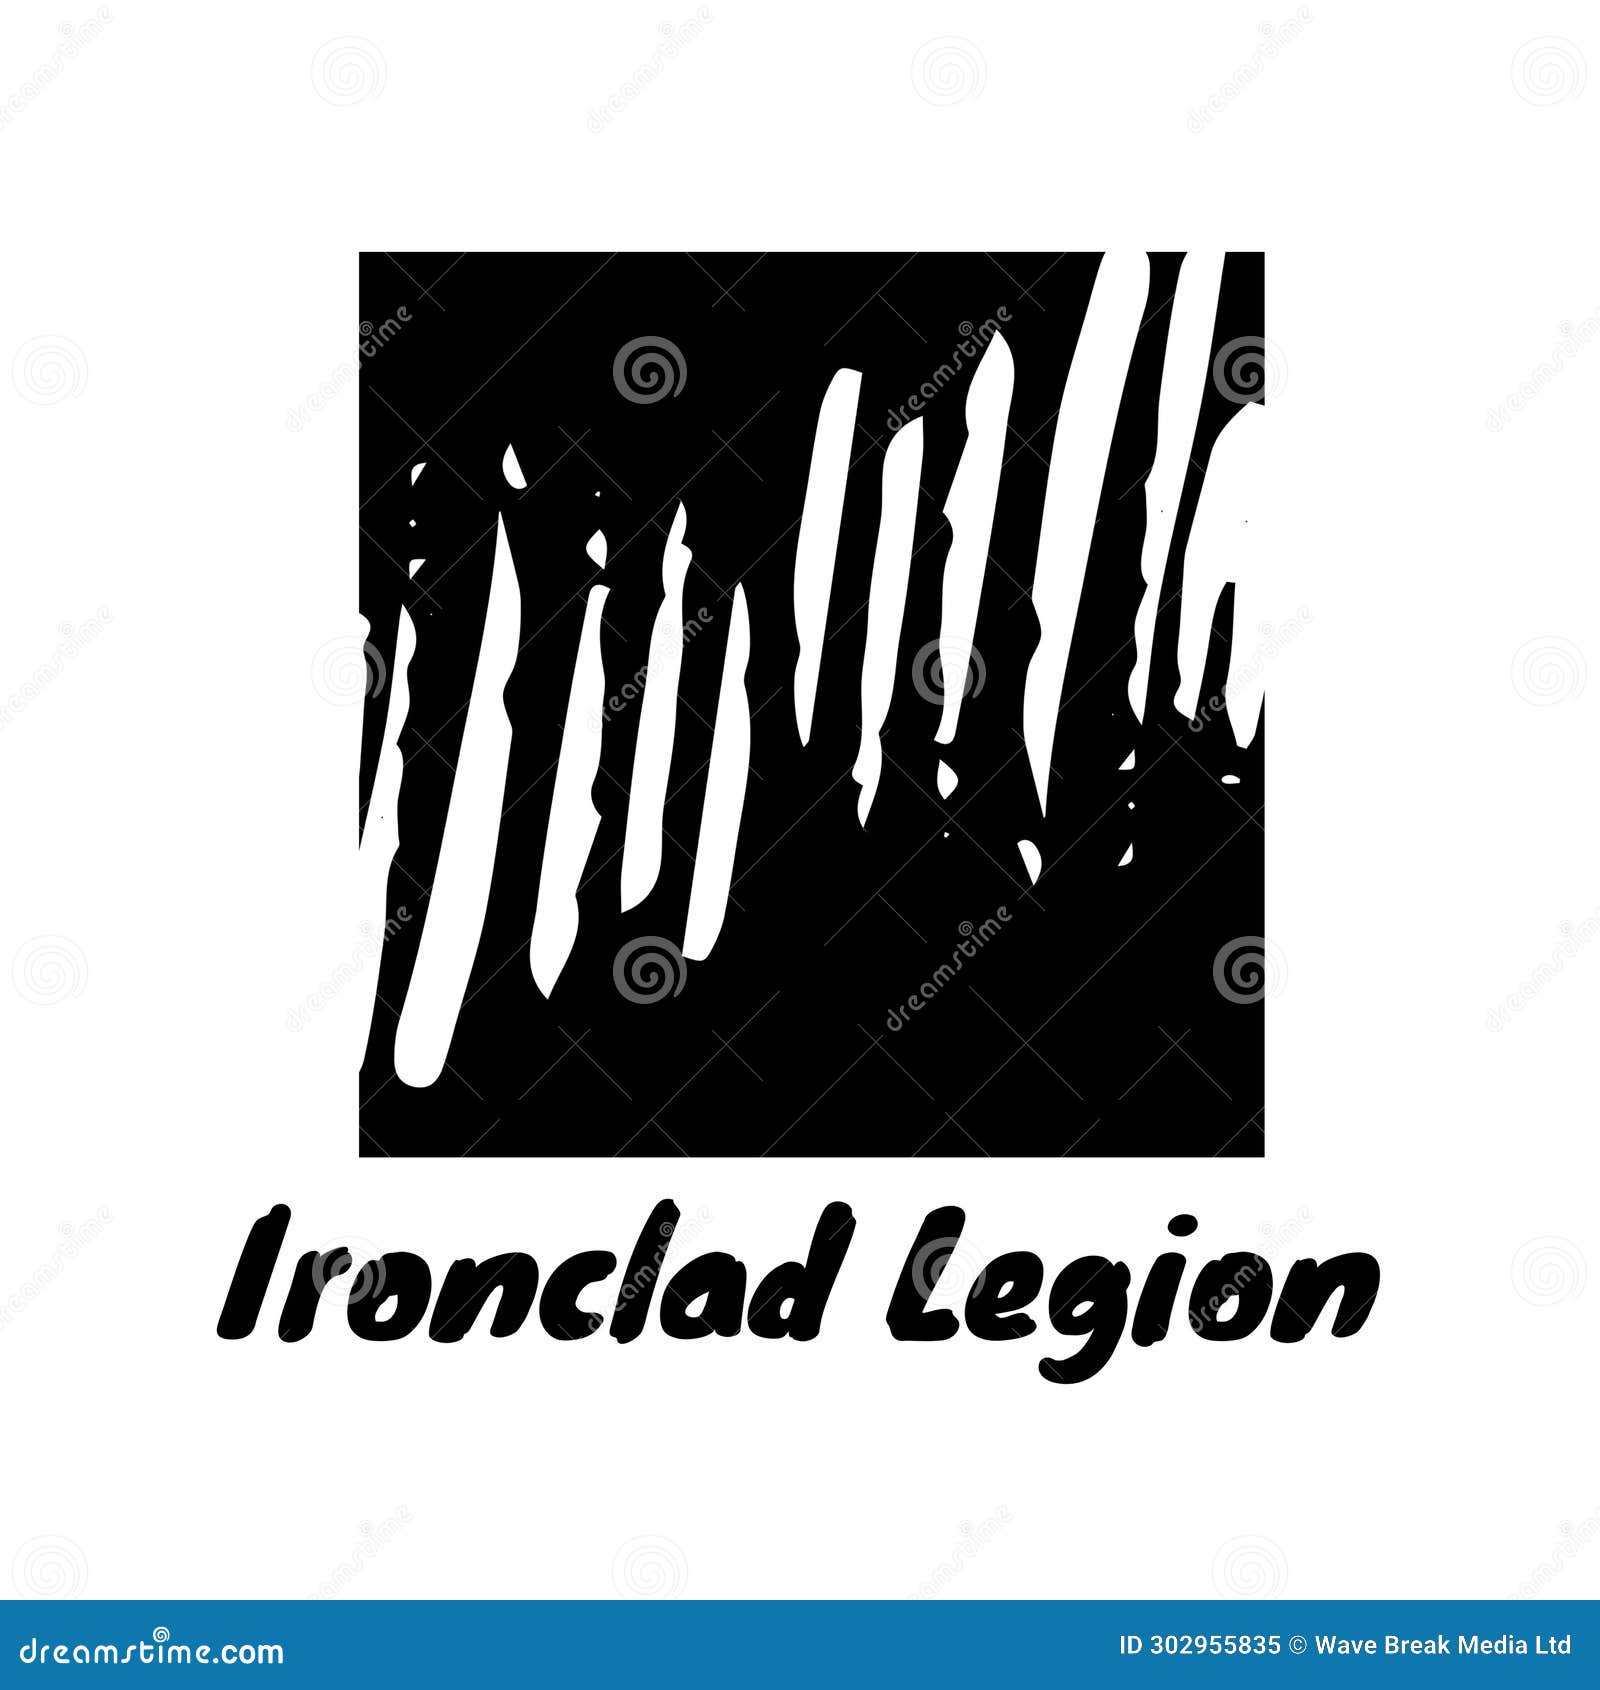 ironclad legion text in black with white brushstrokes in black rectangle logo on white background